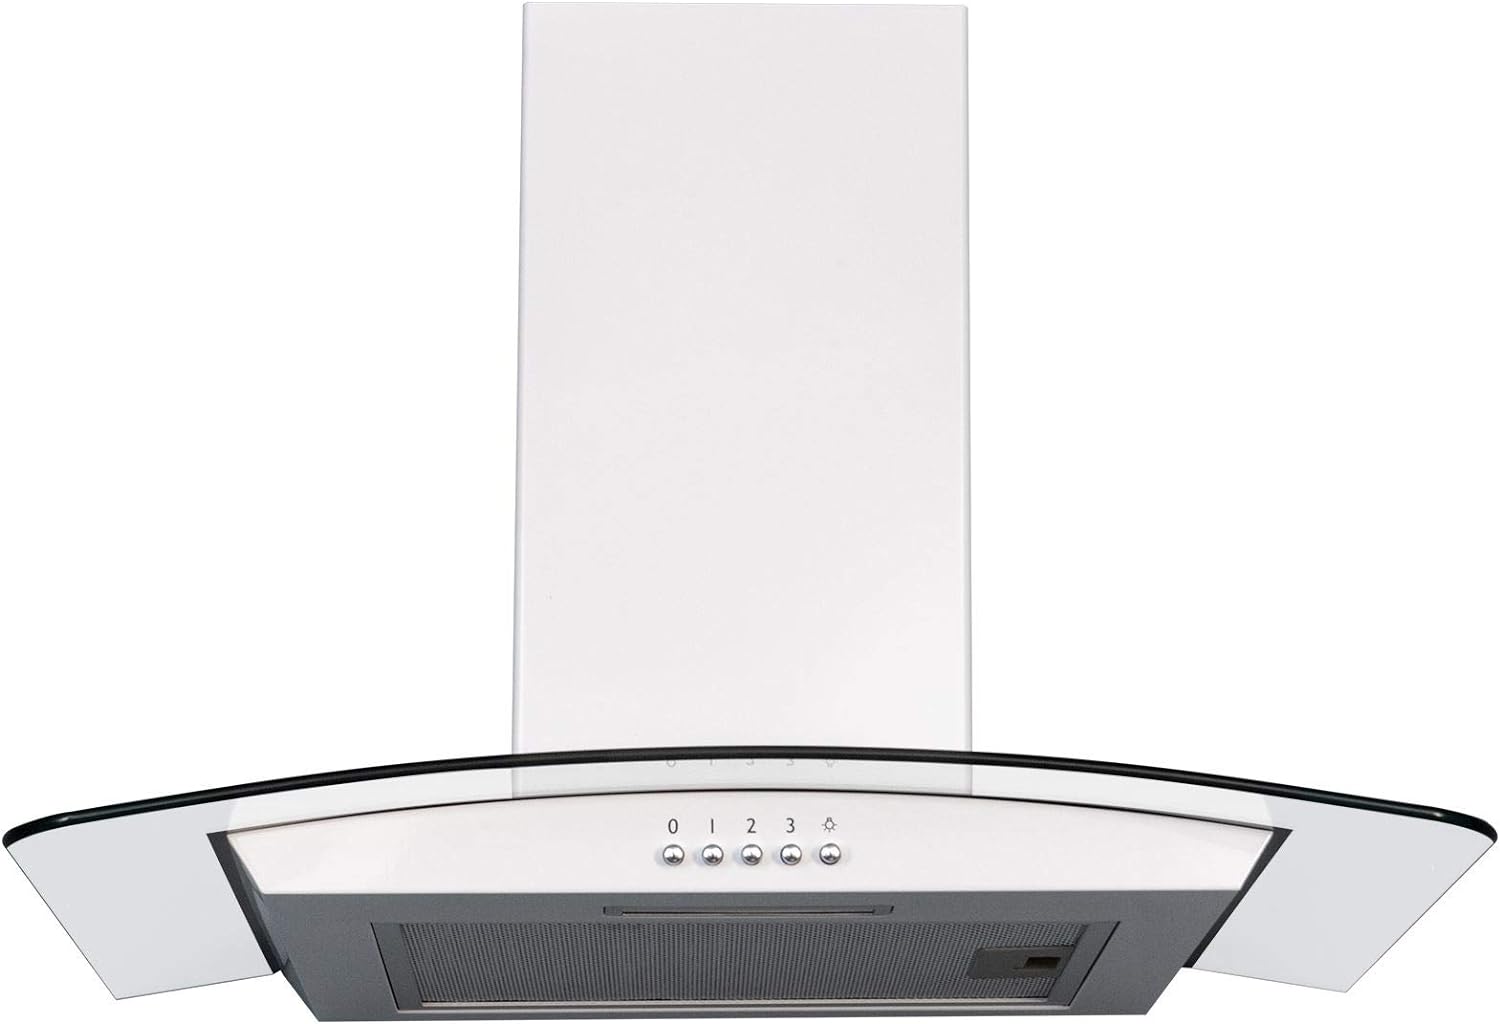 SIA CGH60WH 60cm White Curved Glass Chimney Cooker Hood Kitchen Extractor Fan - Amazing Gadgets Outlet